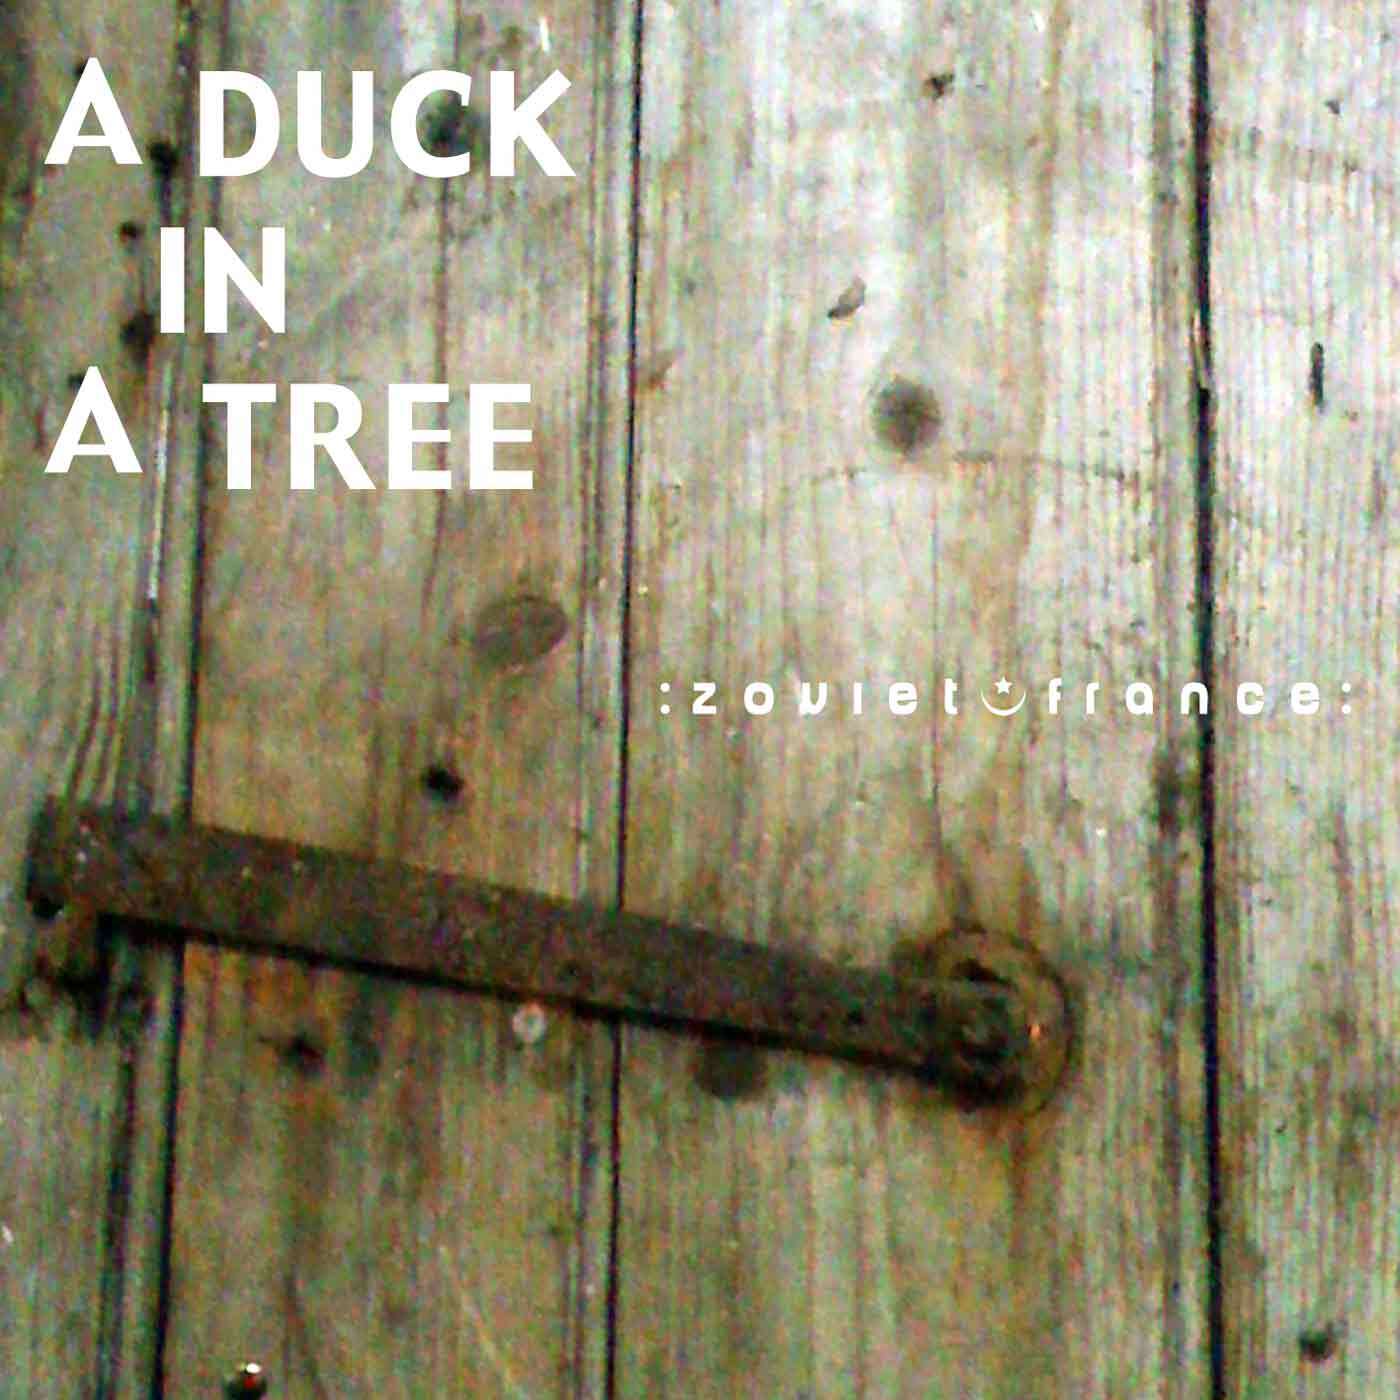 A-Duck-in-a-Tree-2012-07-28-_-A-Knife-Made-of-Salt-layout.jpg